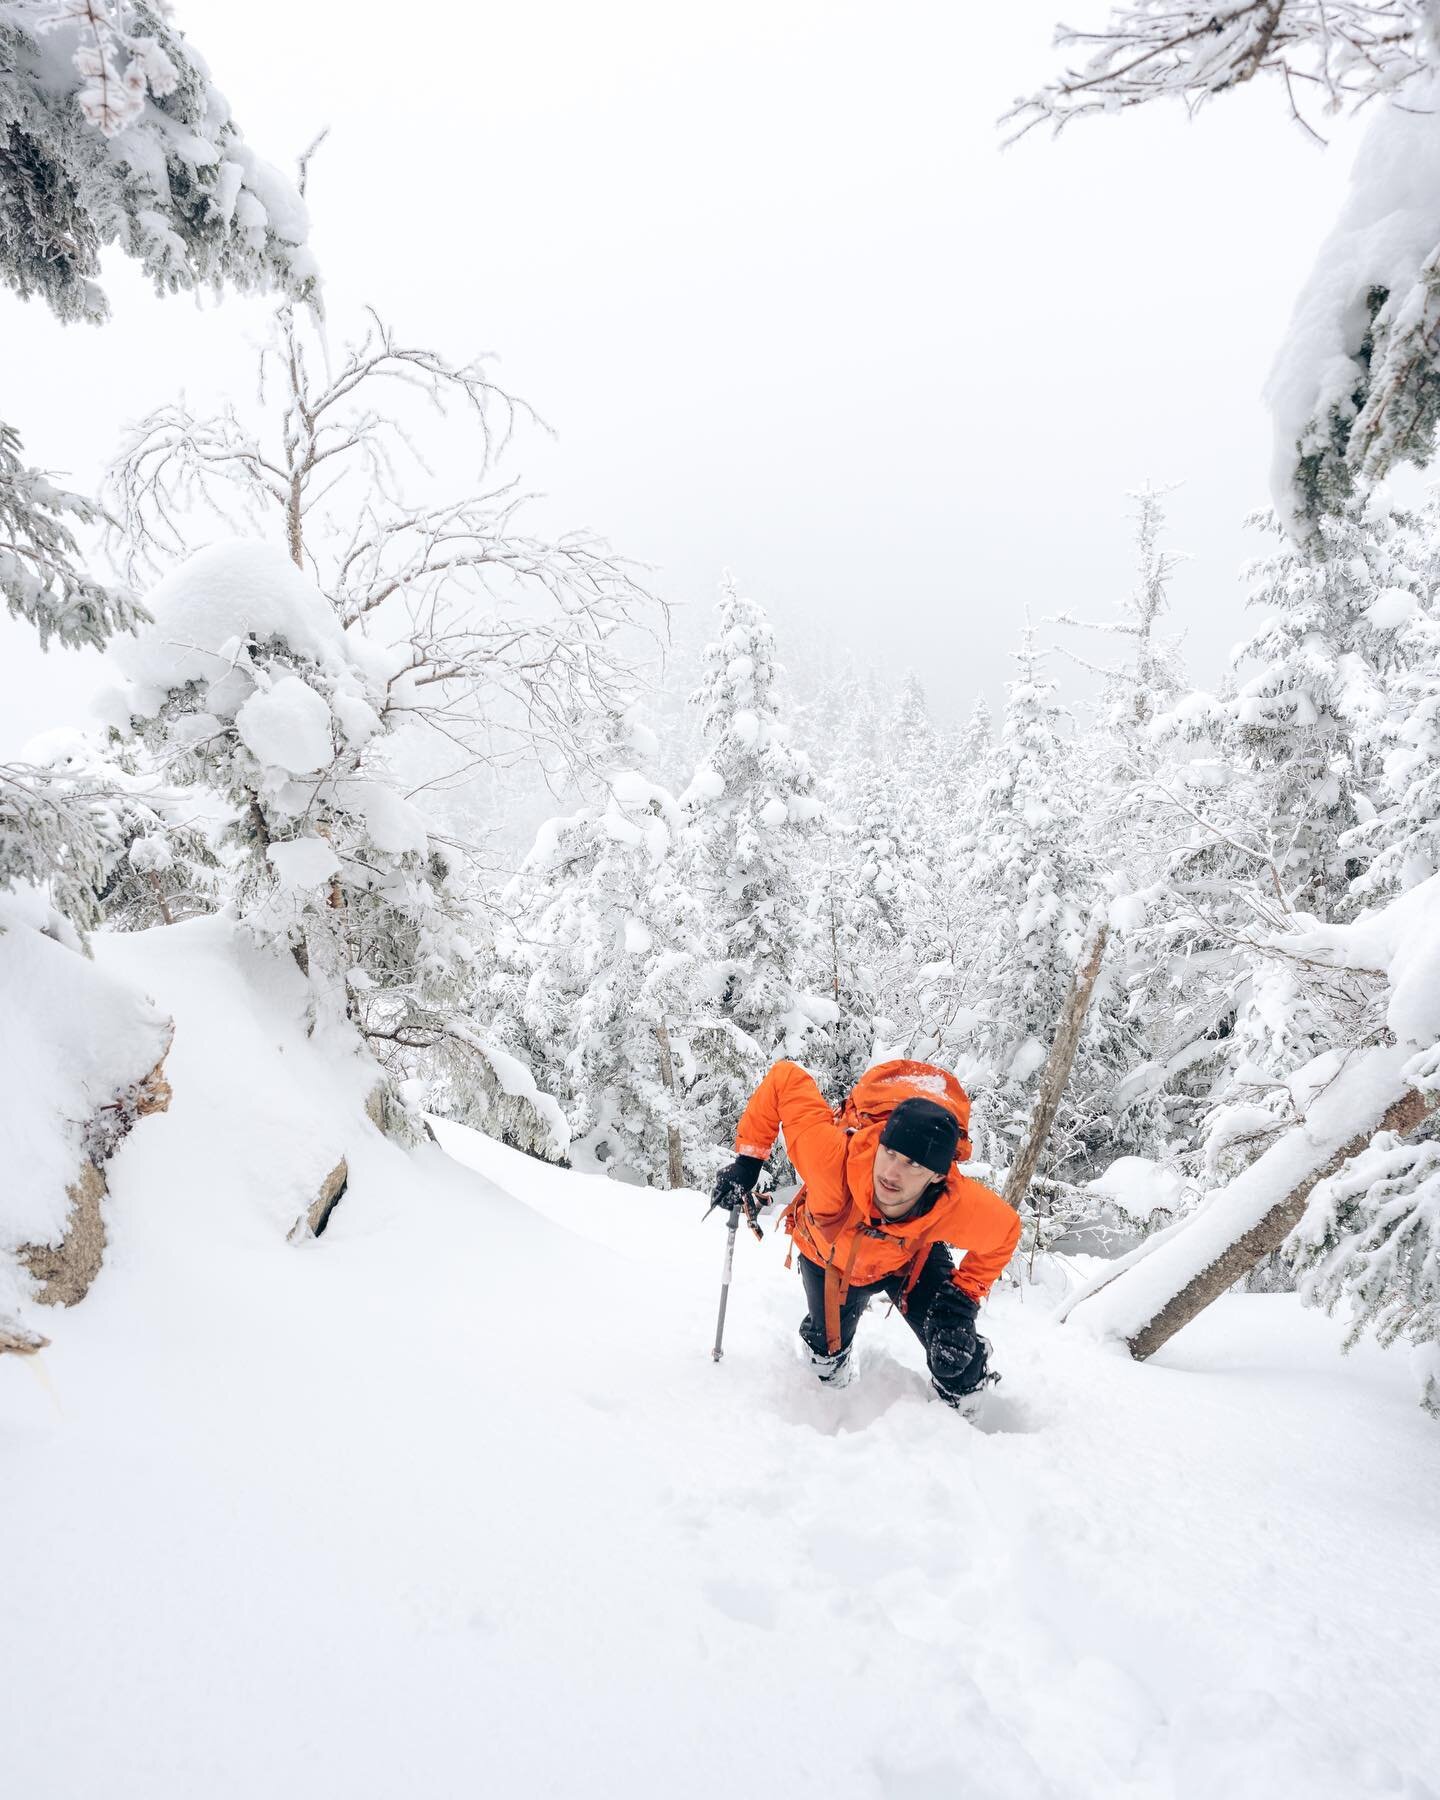 A collection of snow and trees and orange gear.

Hiking to Lower Wolf Jaw the hard way, through 6 miles of untouched trails after a few snowstorms. Took us 7.5 hours to go 6.5 miles. I complained a bit, but had a good time and ate a lot of snacks. I&